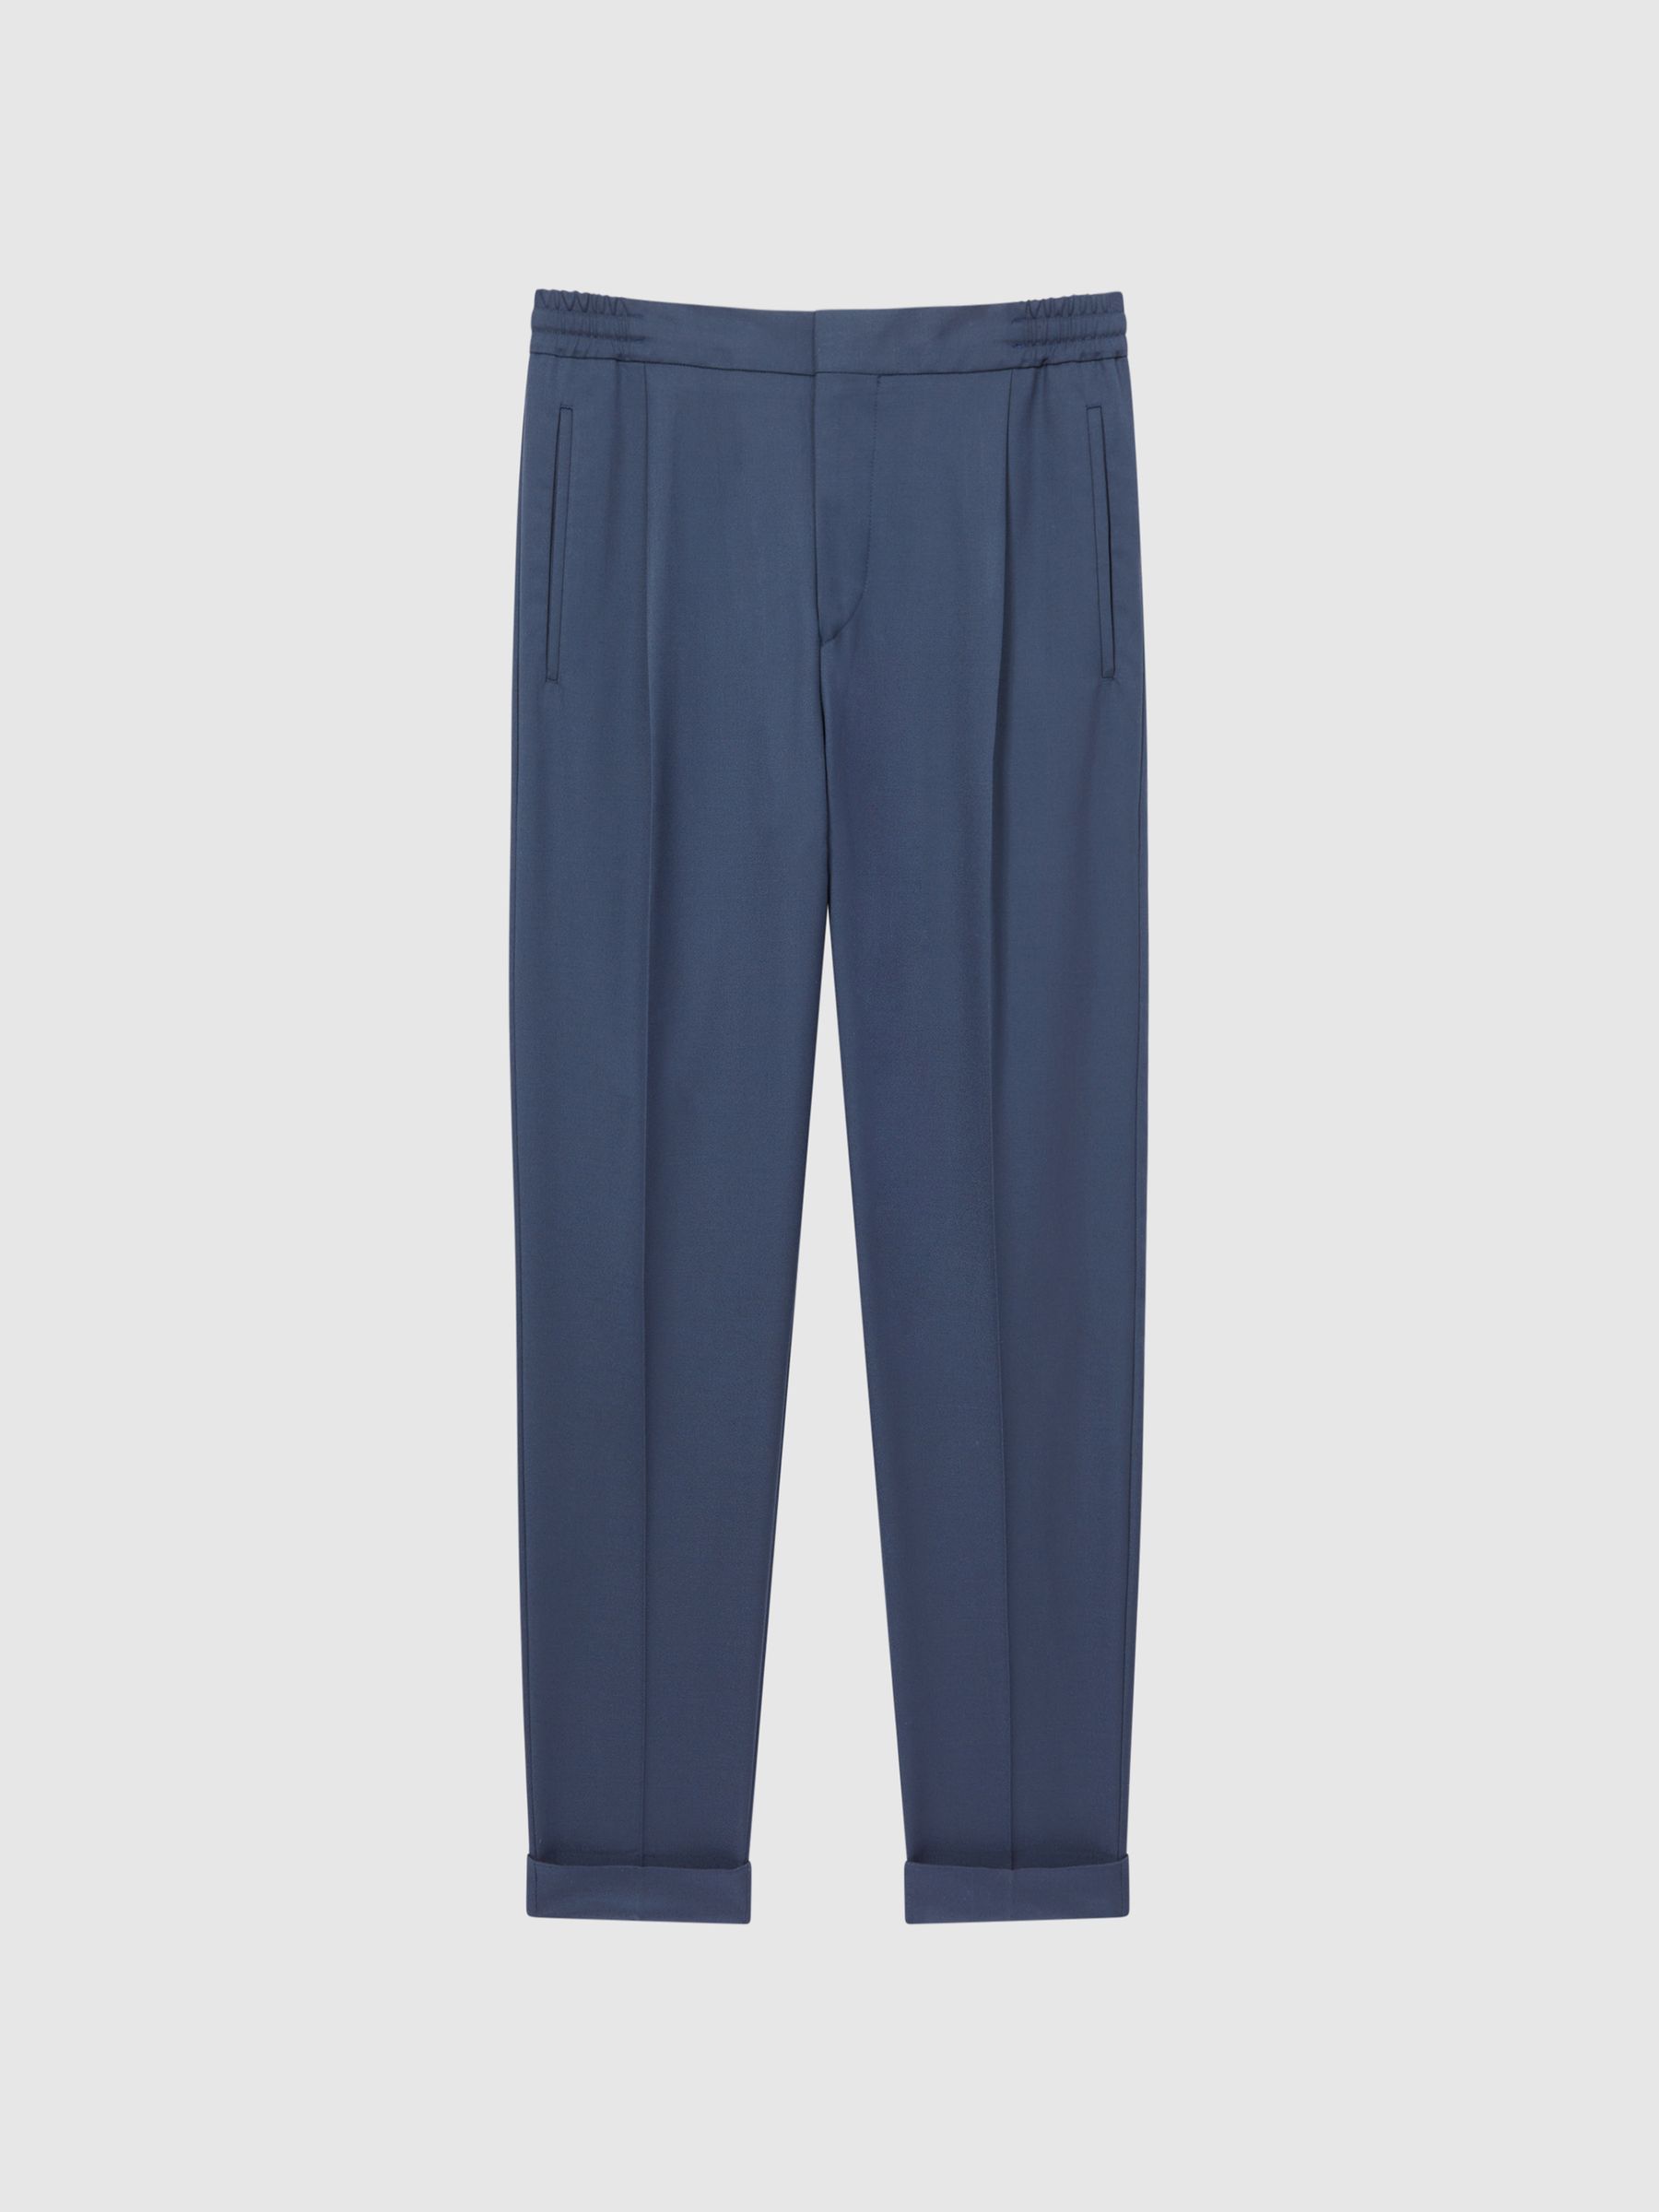 Reiss Brighton Relaxed Drawstring Trousers with Turn-Ups | REISS Australia